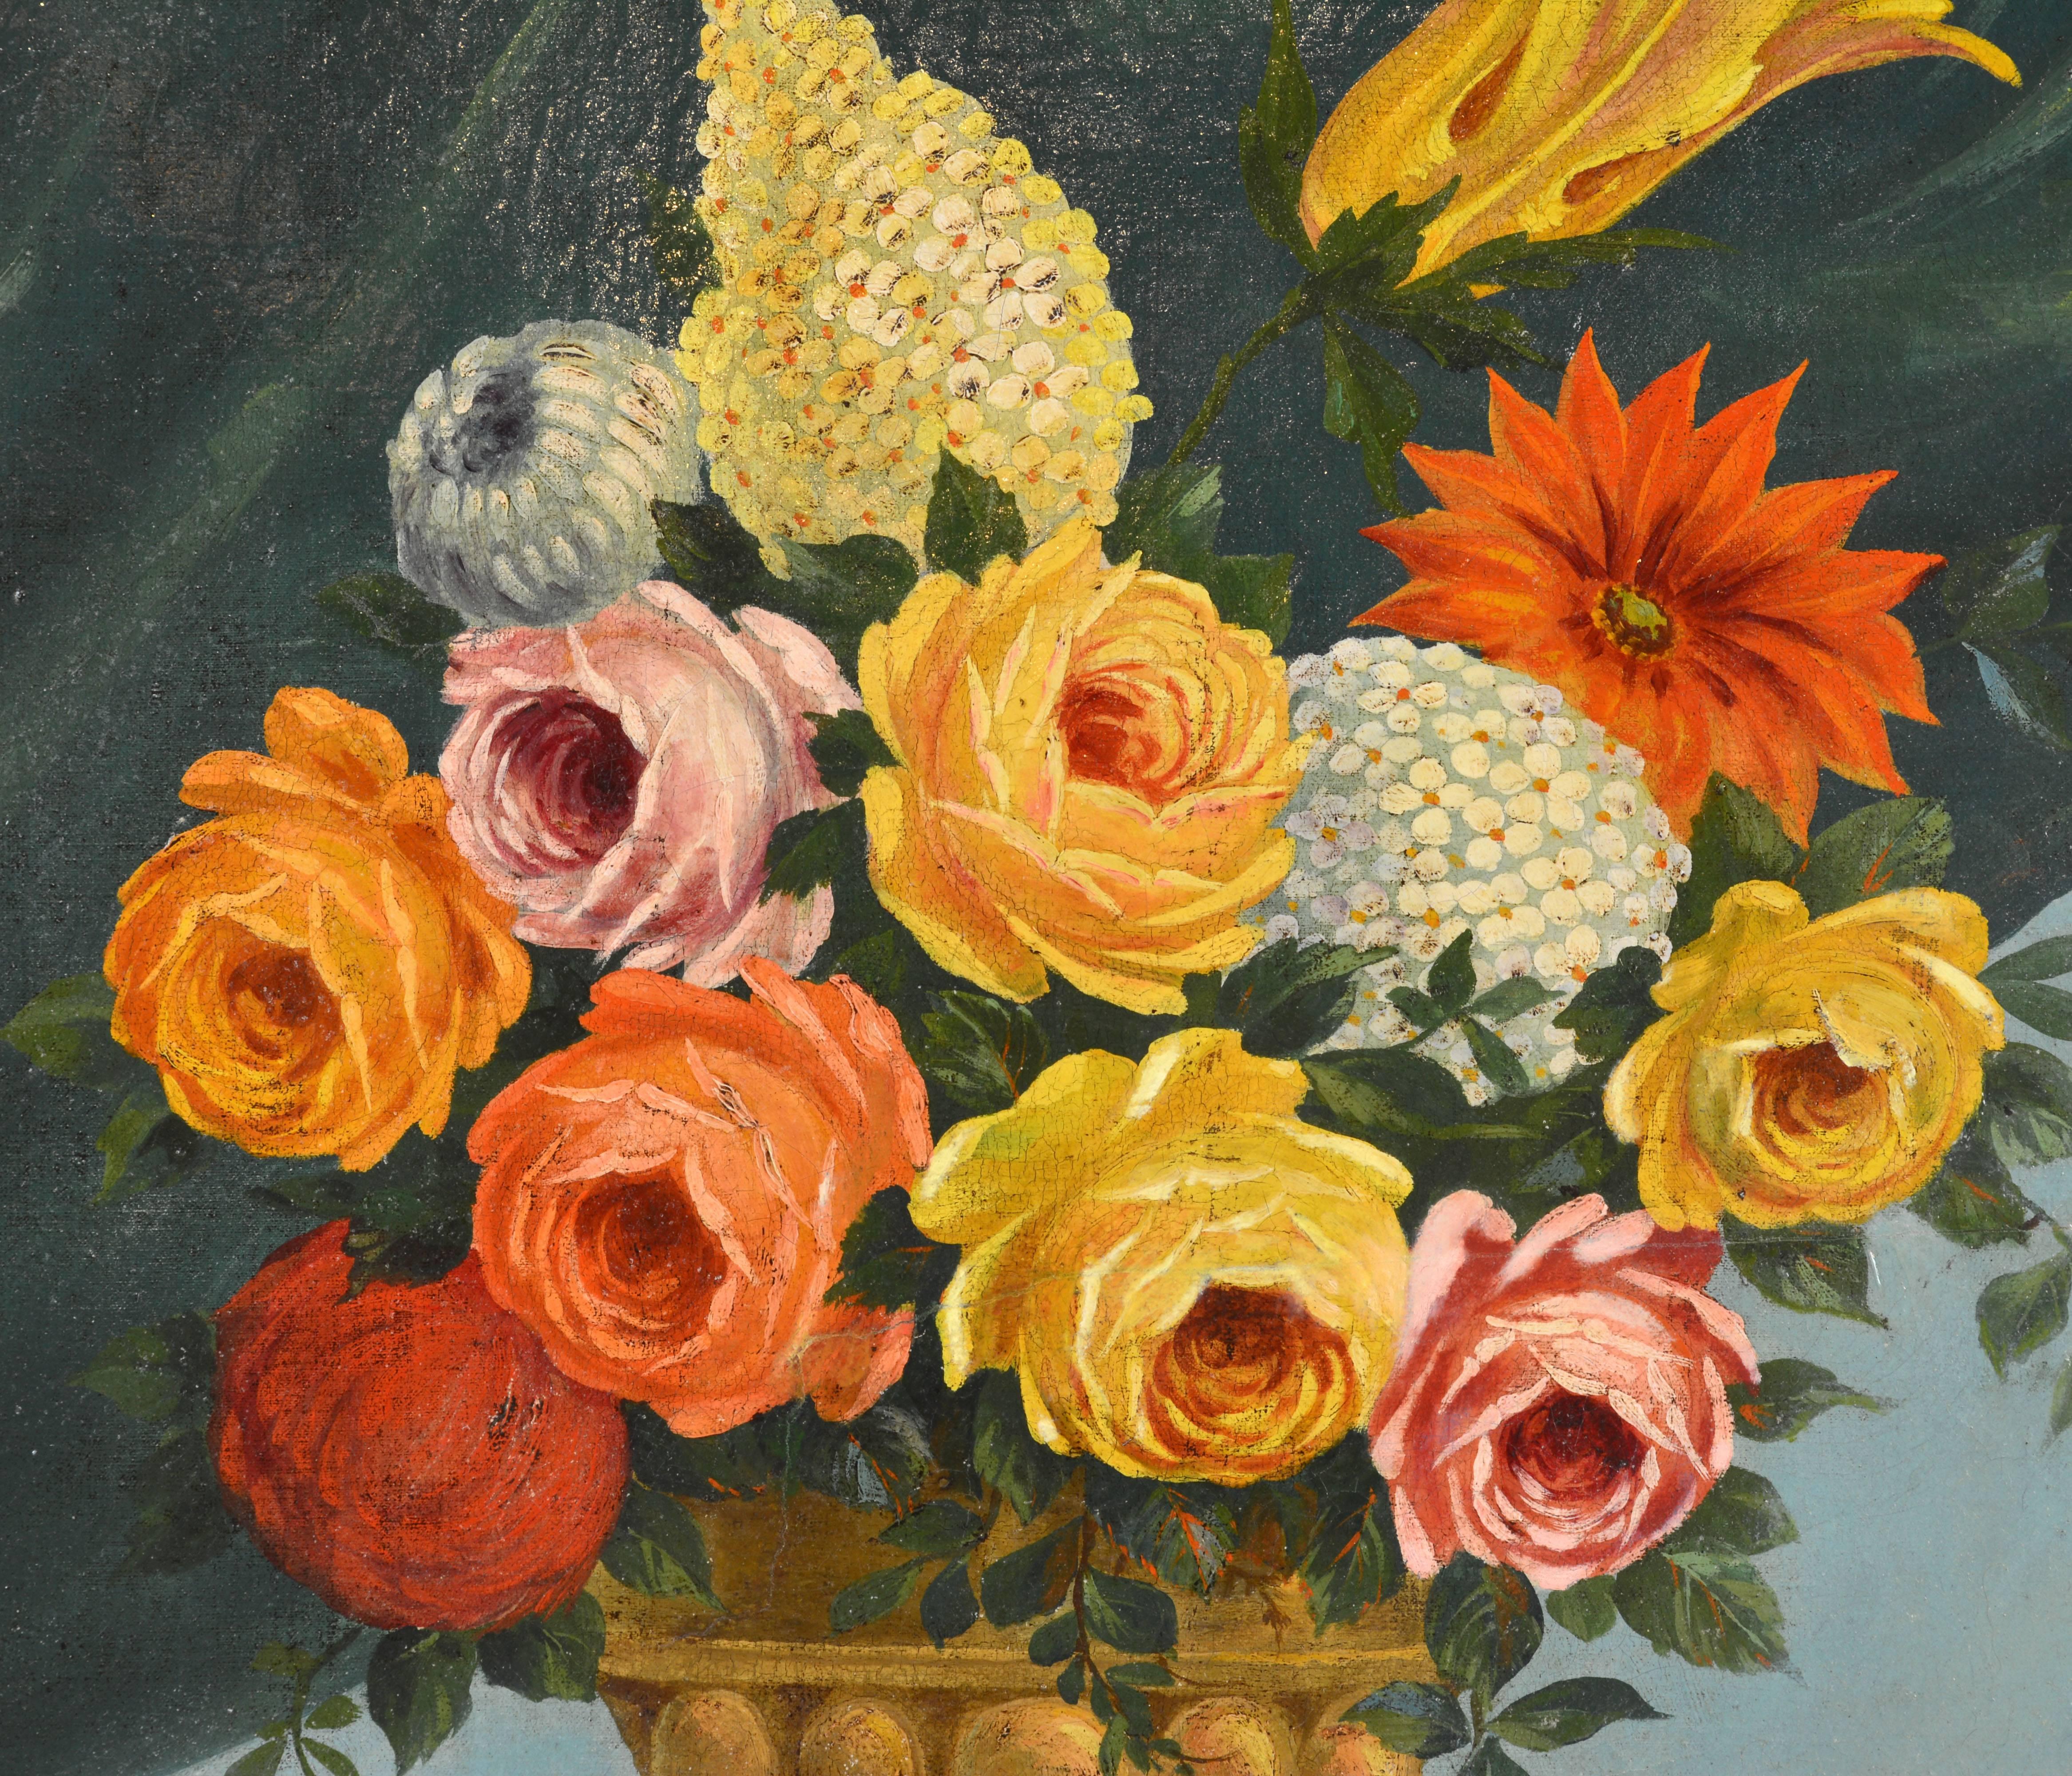 Baroque Italian Provincial 19th Century Oil with Flowers, Fruit and Blue Cockatoo